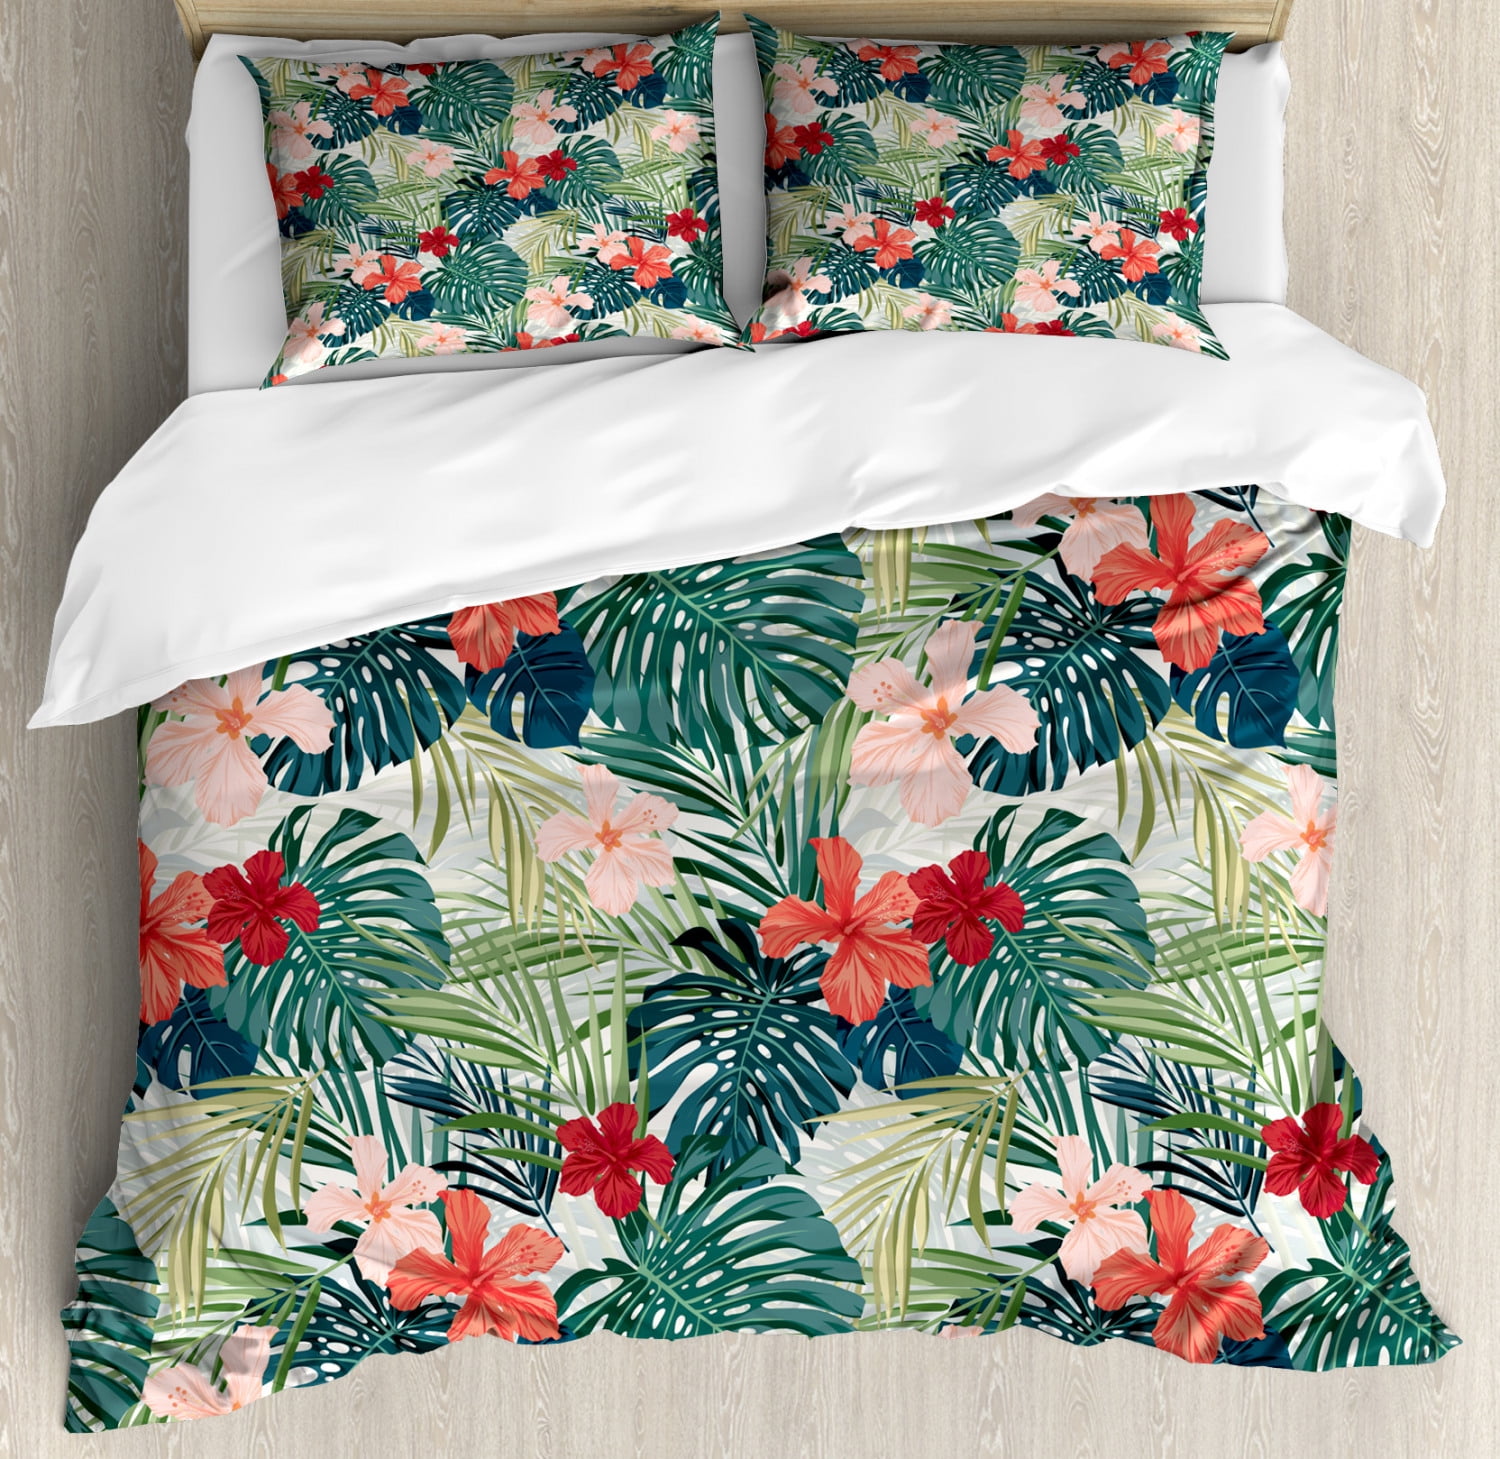 Leaf Duvet Cover Set Queen Size, Summer Beach Holiday Themed Hibiscus ...